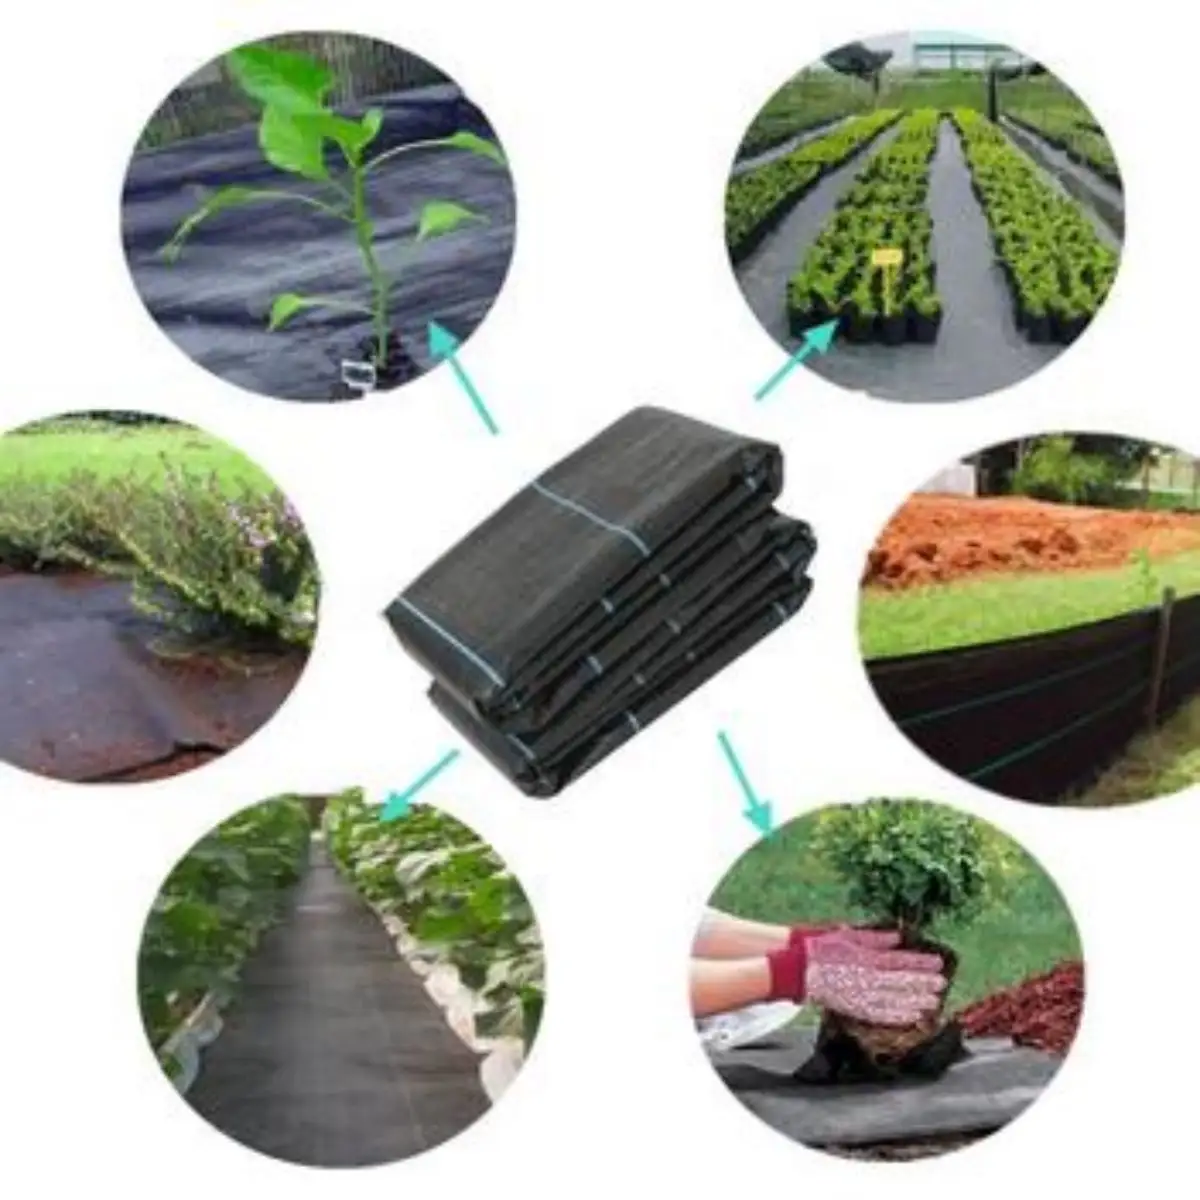 landscaping agricultural orchards greenhouses flowers planting and other ground grass prevention weed mat